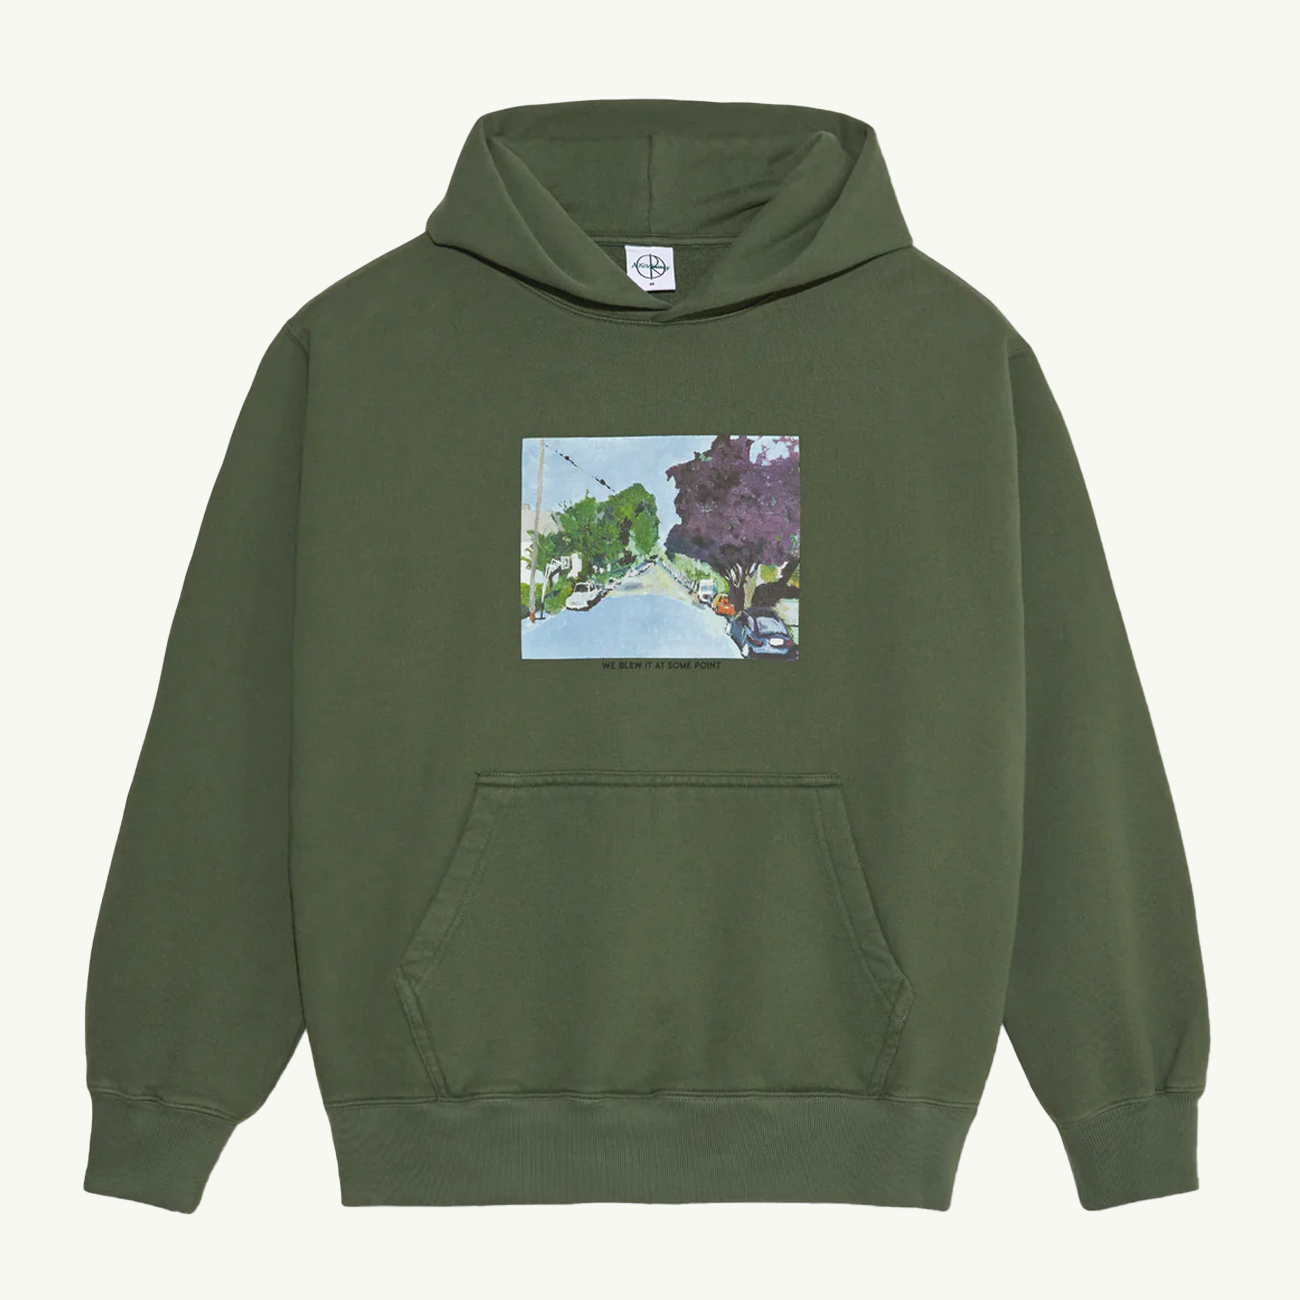 'We Blew It At Some Point' Ed Hoodie - Grey/Green